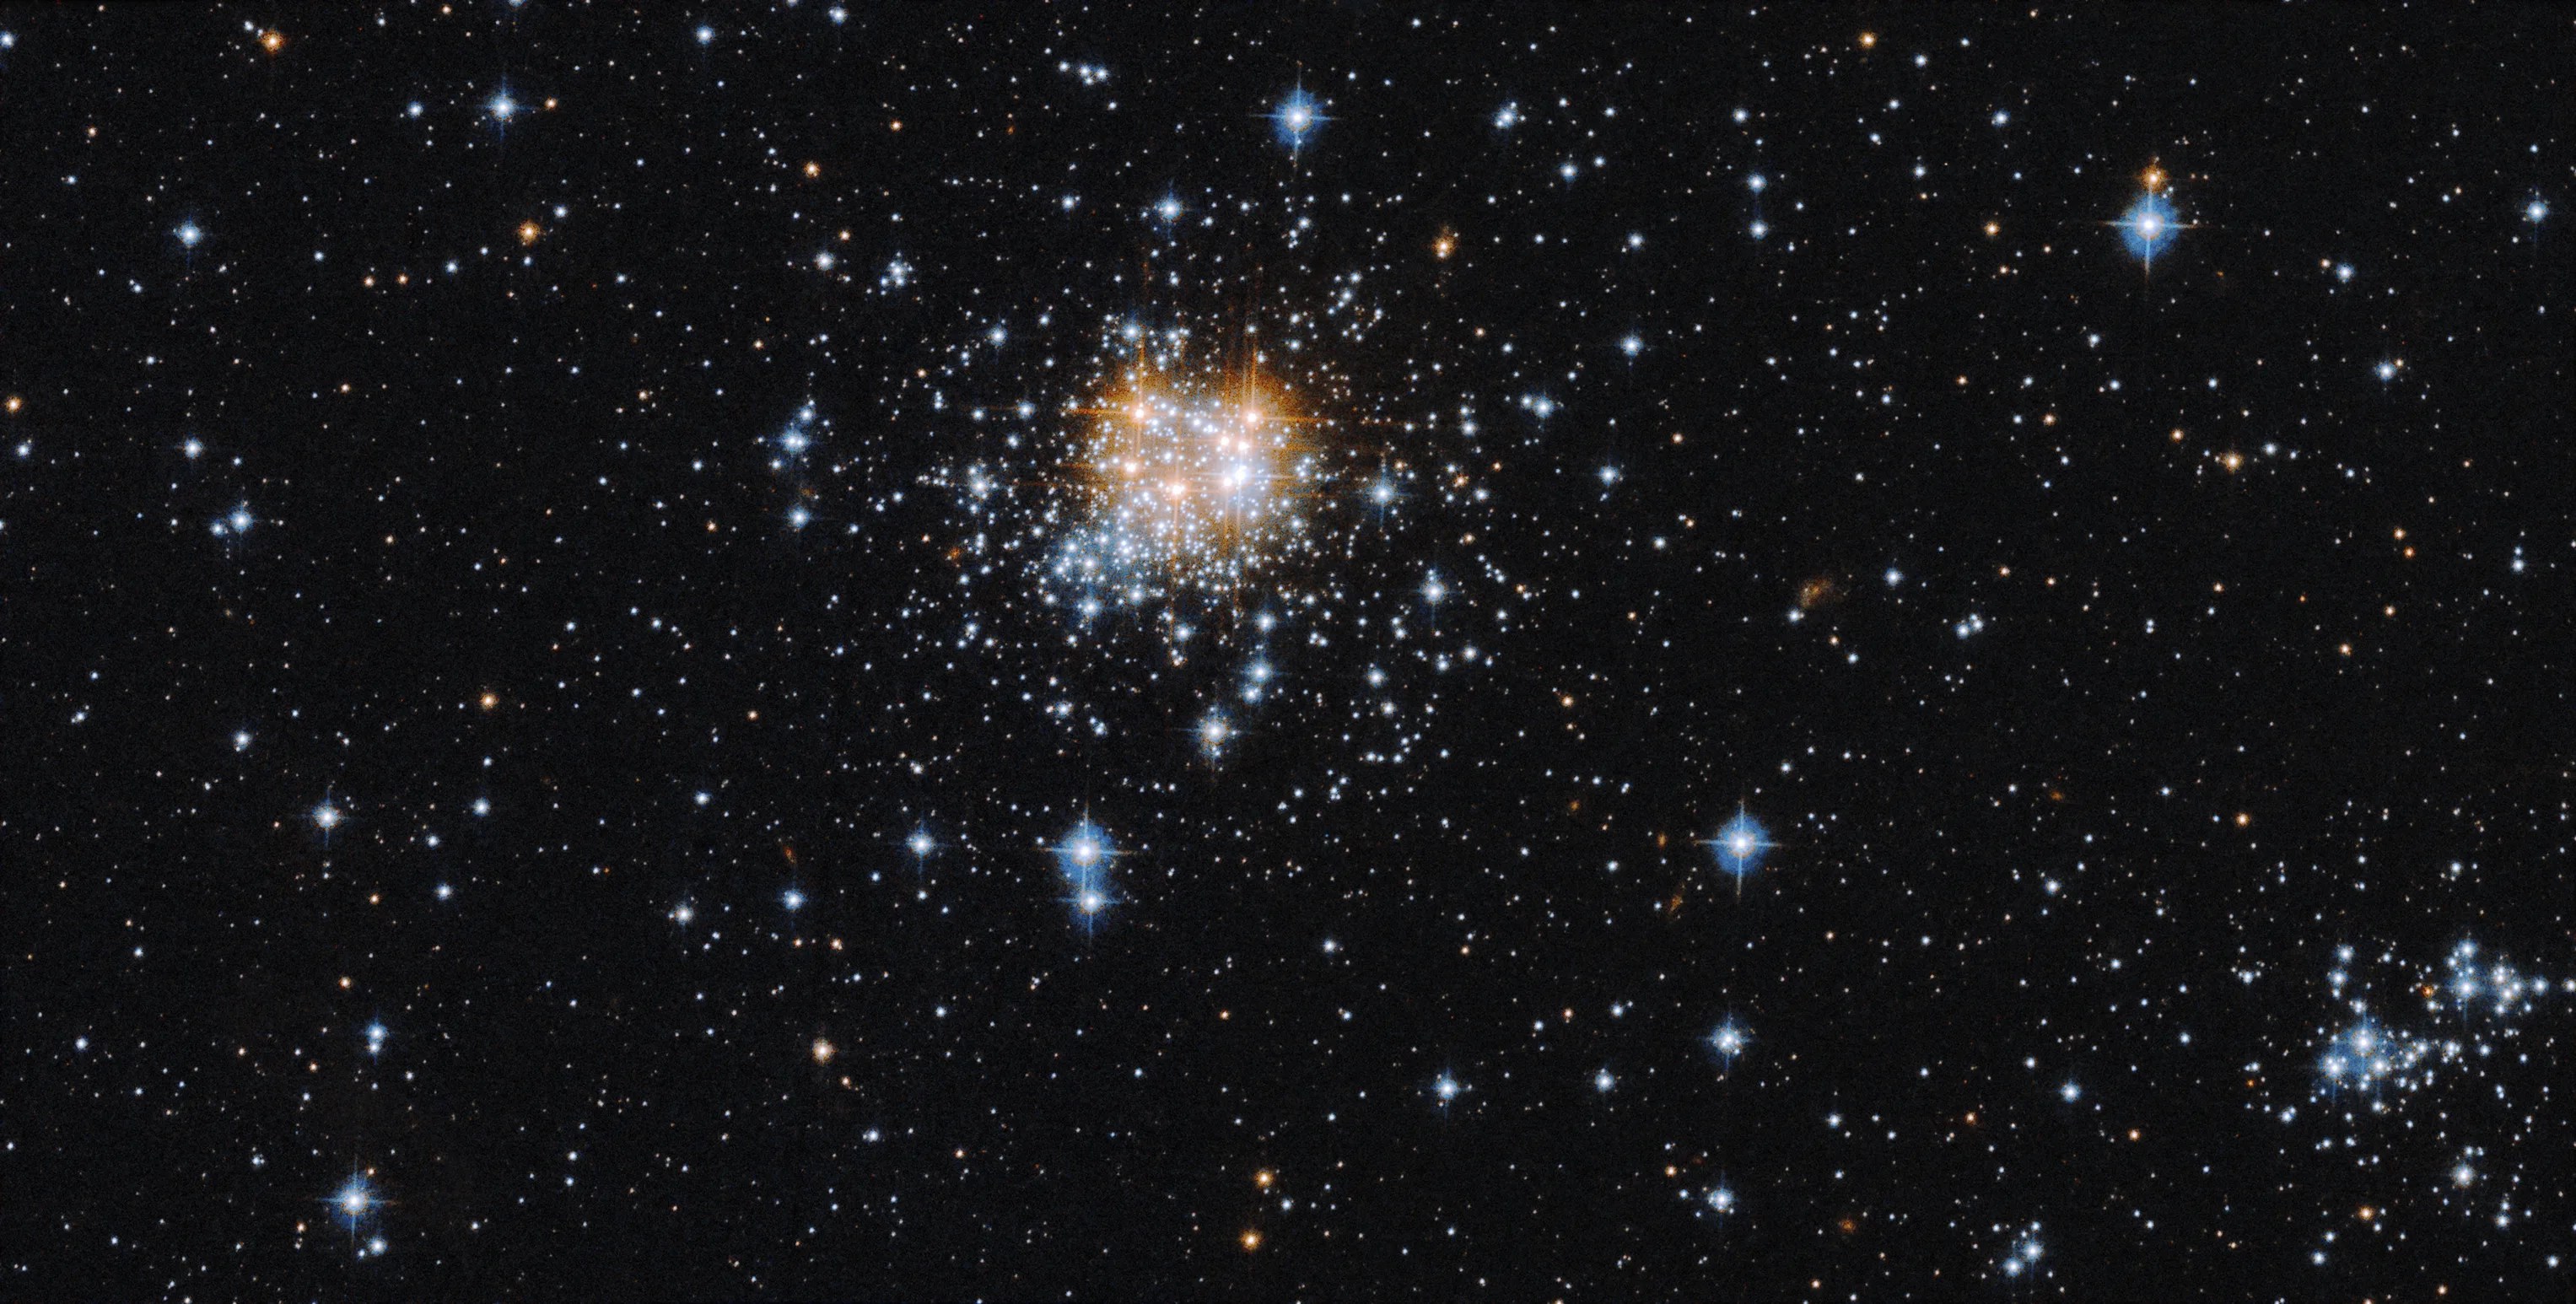 A tight group of bright, blue-white stars just left of center in the image. the group also holds a few orange-white stars. A smattering of blue-white stars against a black background fills the rest of the scene.